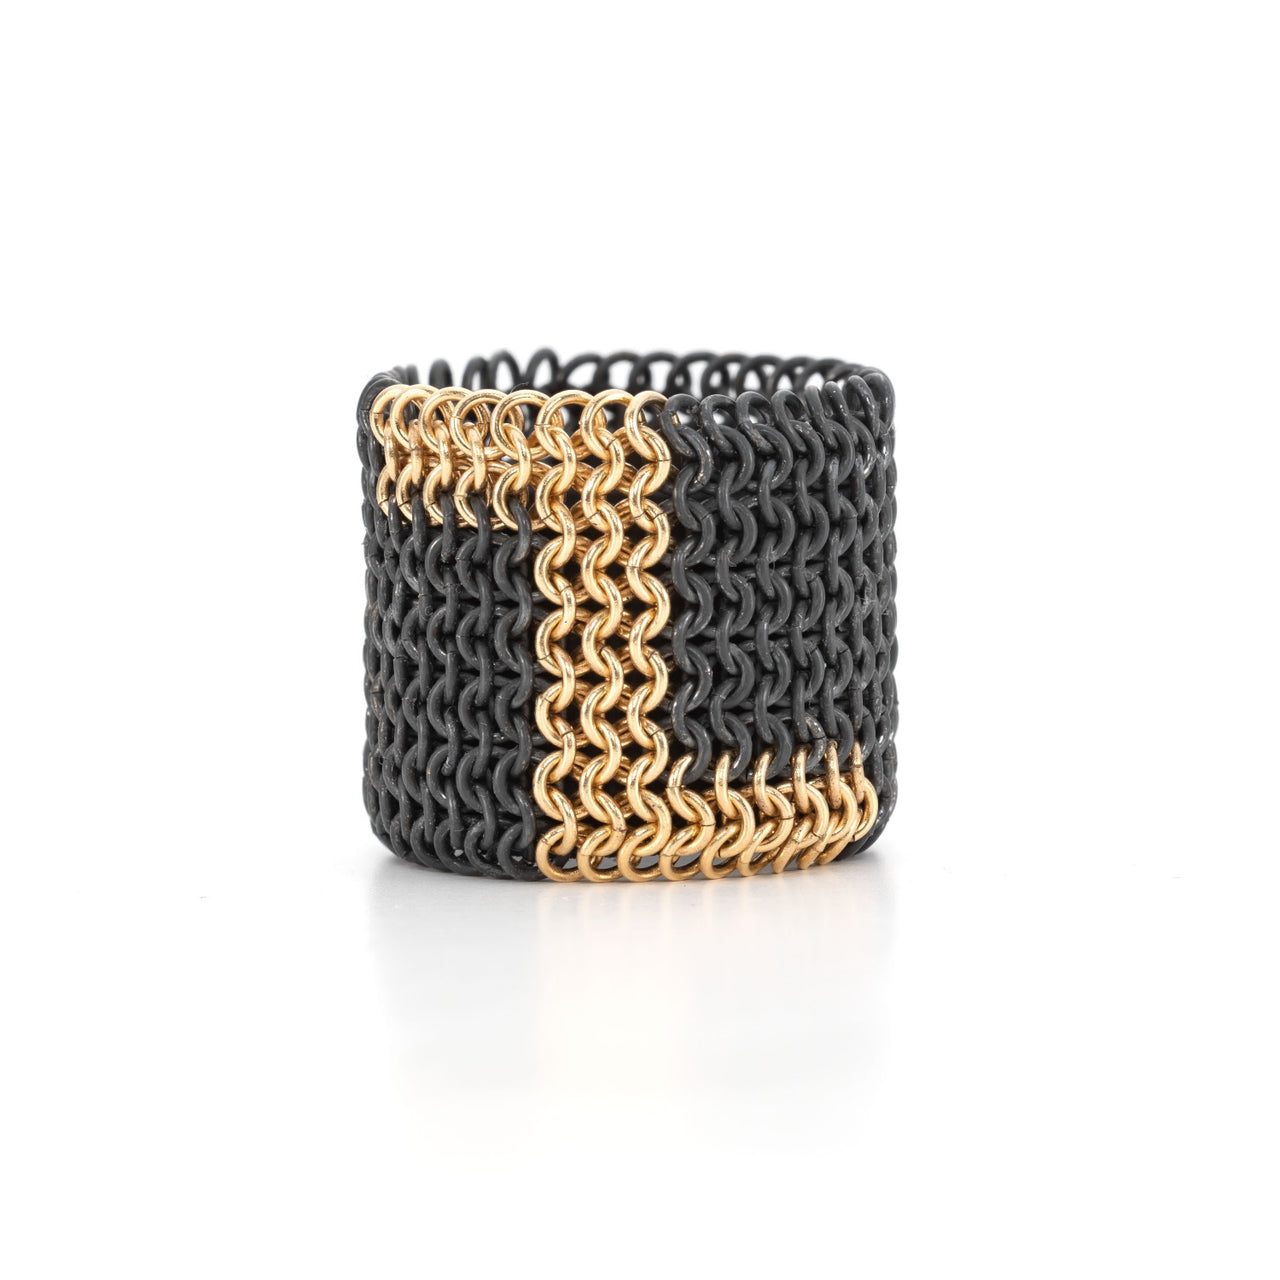 ThunderBolt wide chainmail ring 18ct yellow gold and oxidised silver Handmade jewellery by Corrinne Eira Evans